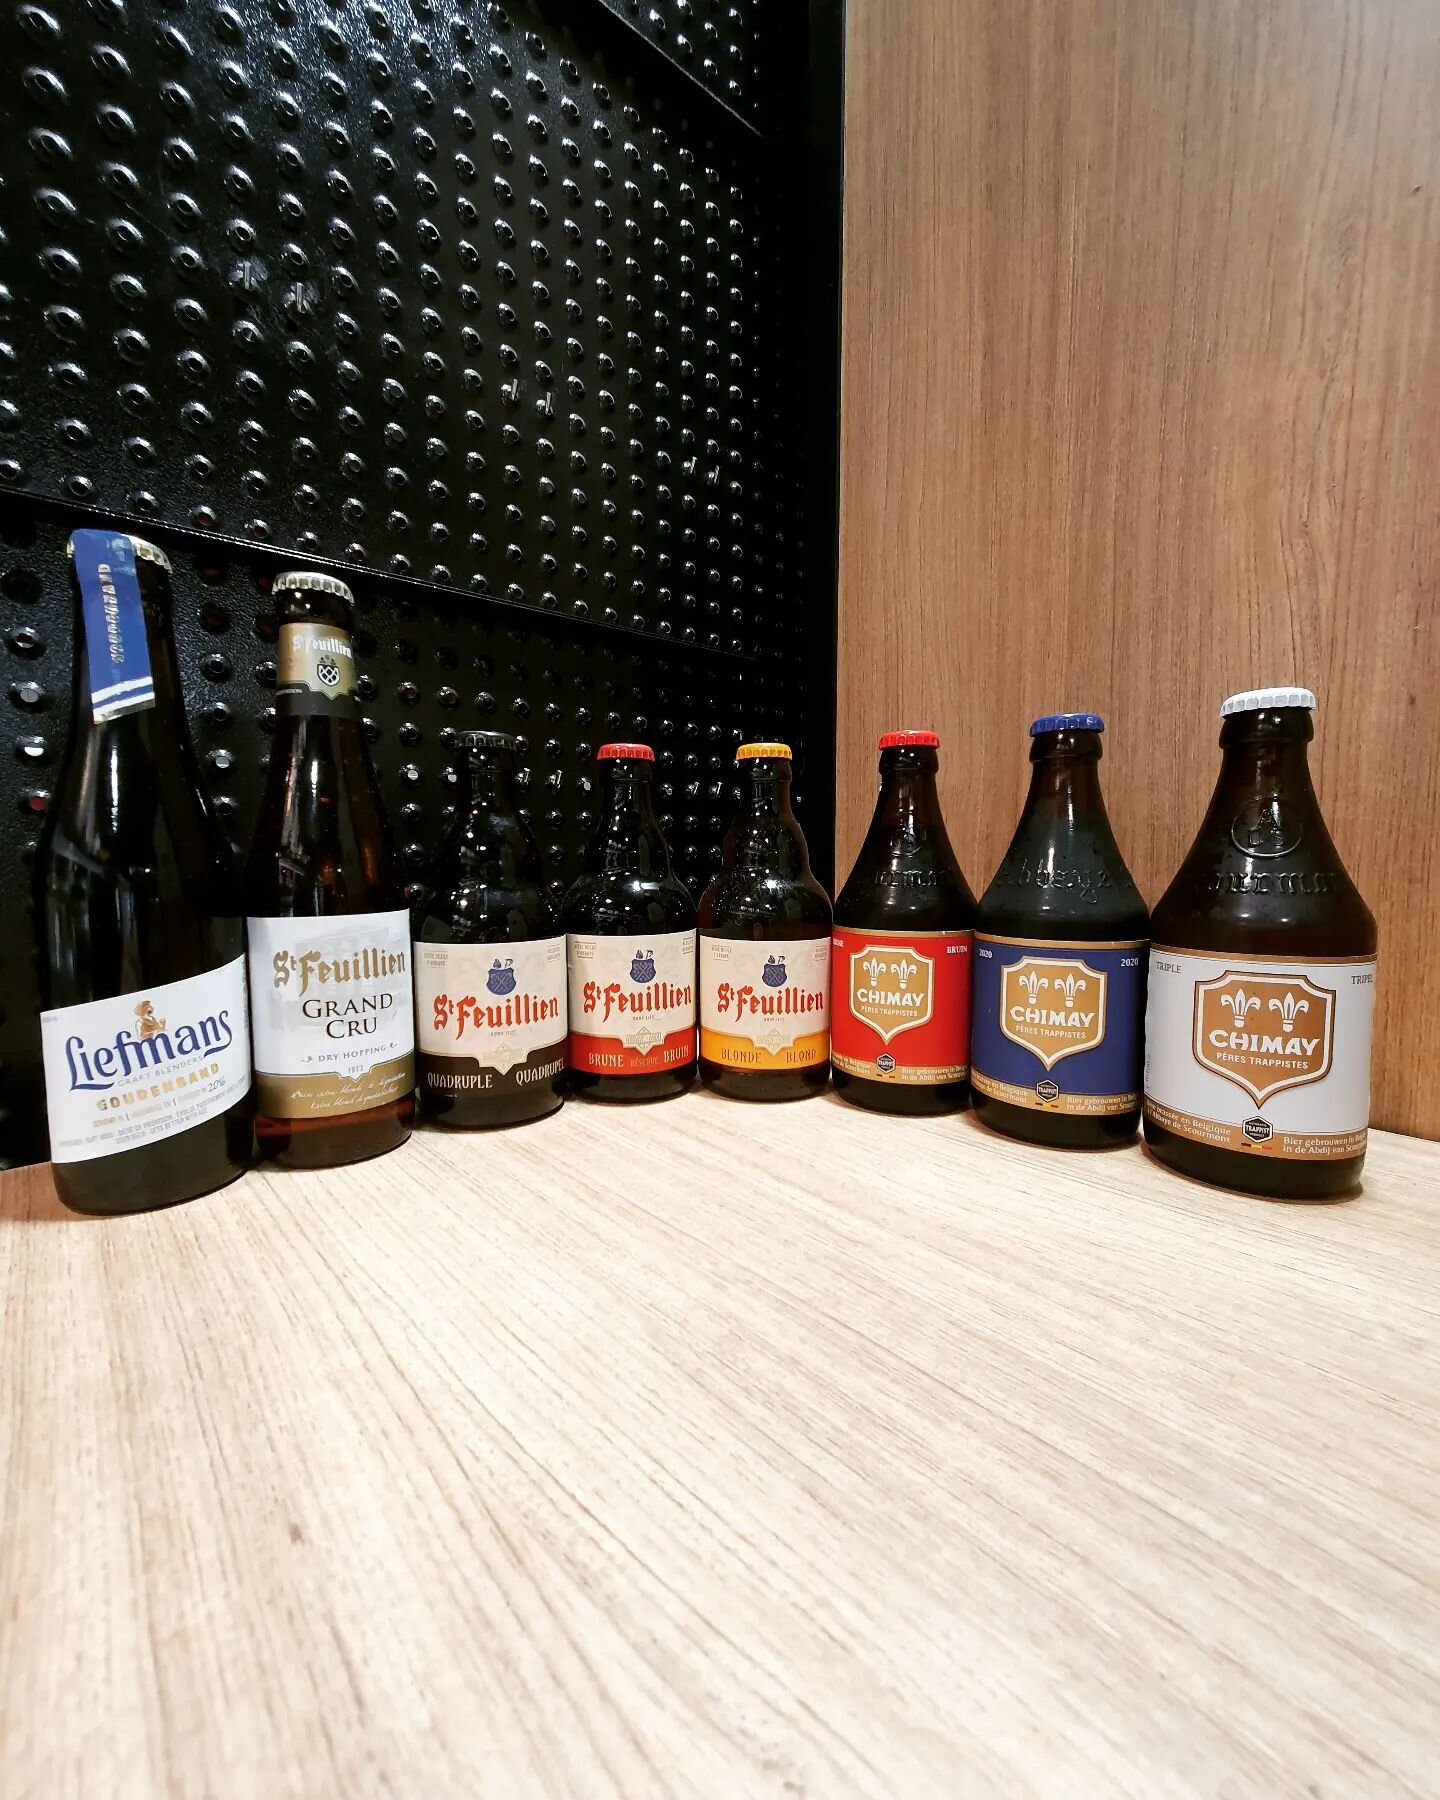 A whole bunch of fresh Belgian Beers have landed instore from the likes of Liefmans, St Feuillien and Chimay. Come in and check out the whole range!
Pictured:
🔵 Liefmans Goufenband
🍺 St Feuillien Grand Cru
🟤 St Feuillien Quadruple
🔴 St Feuillien 